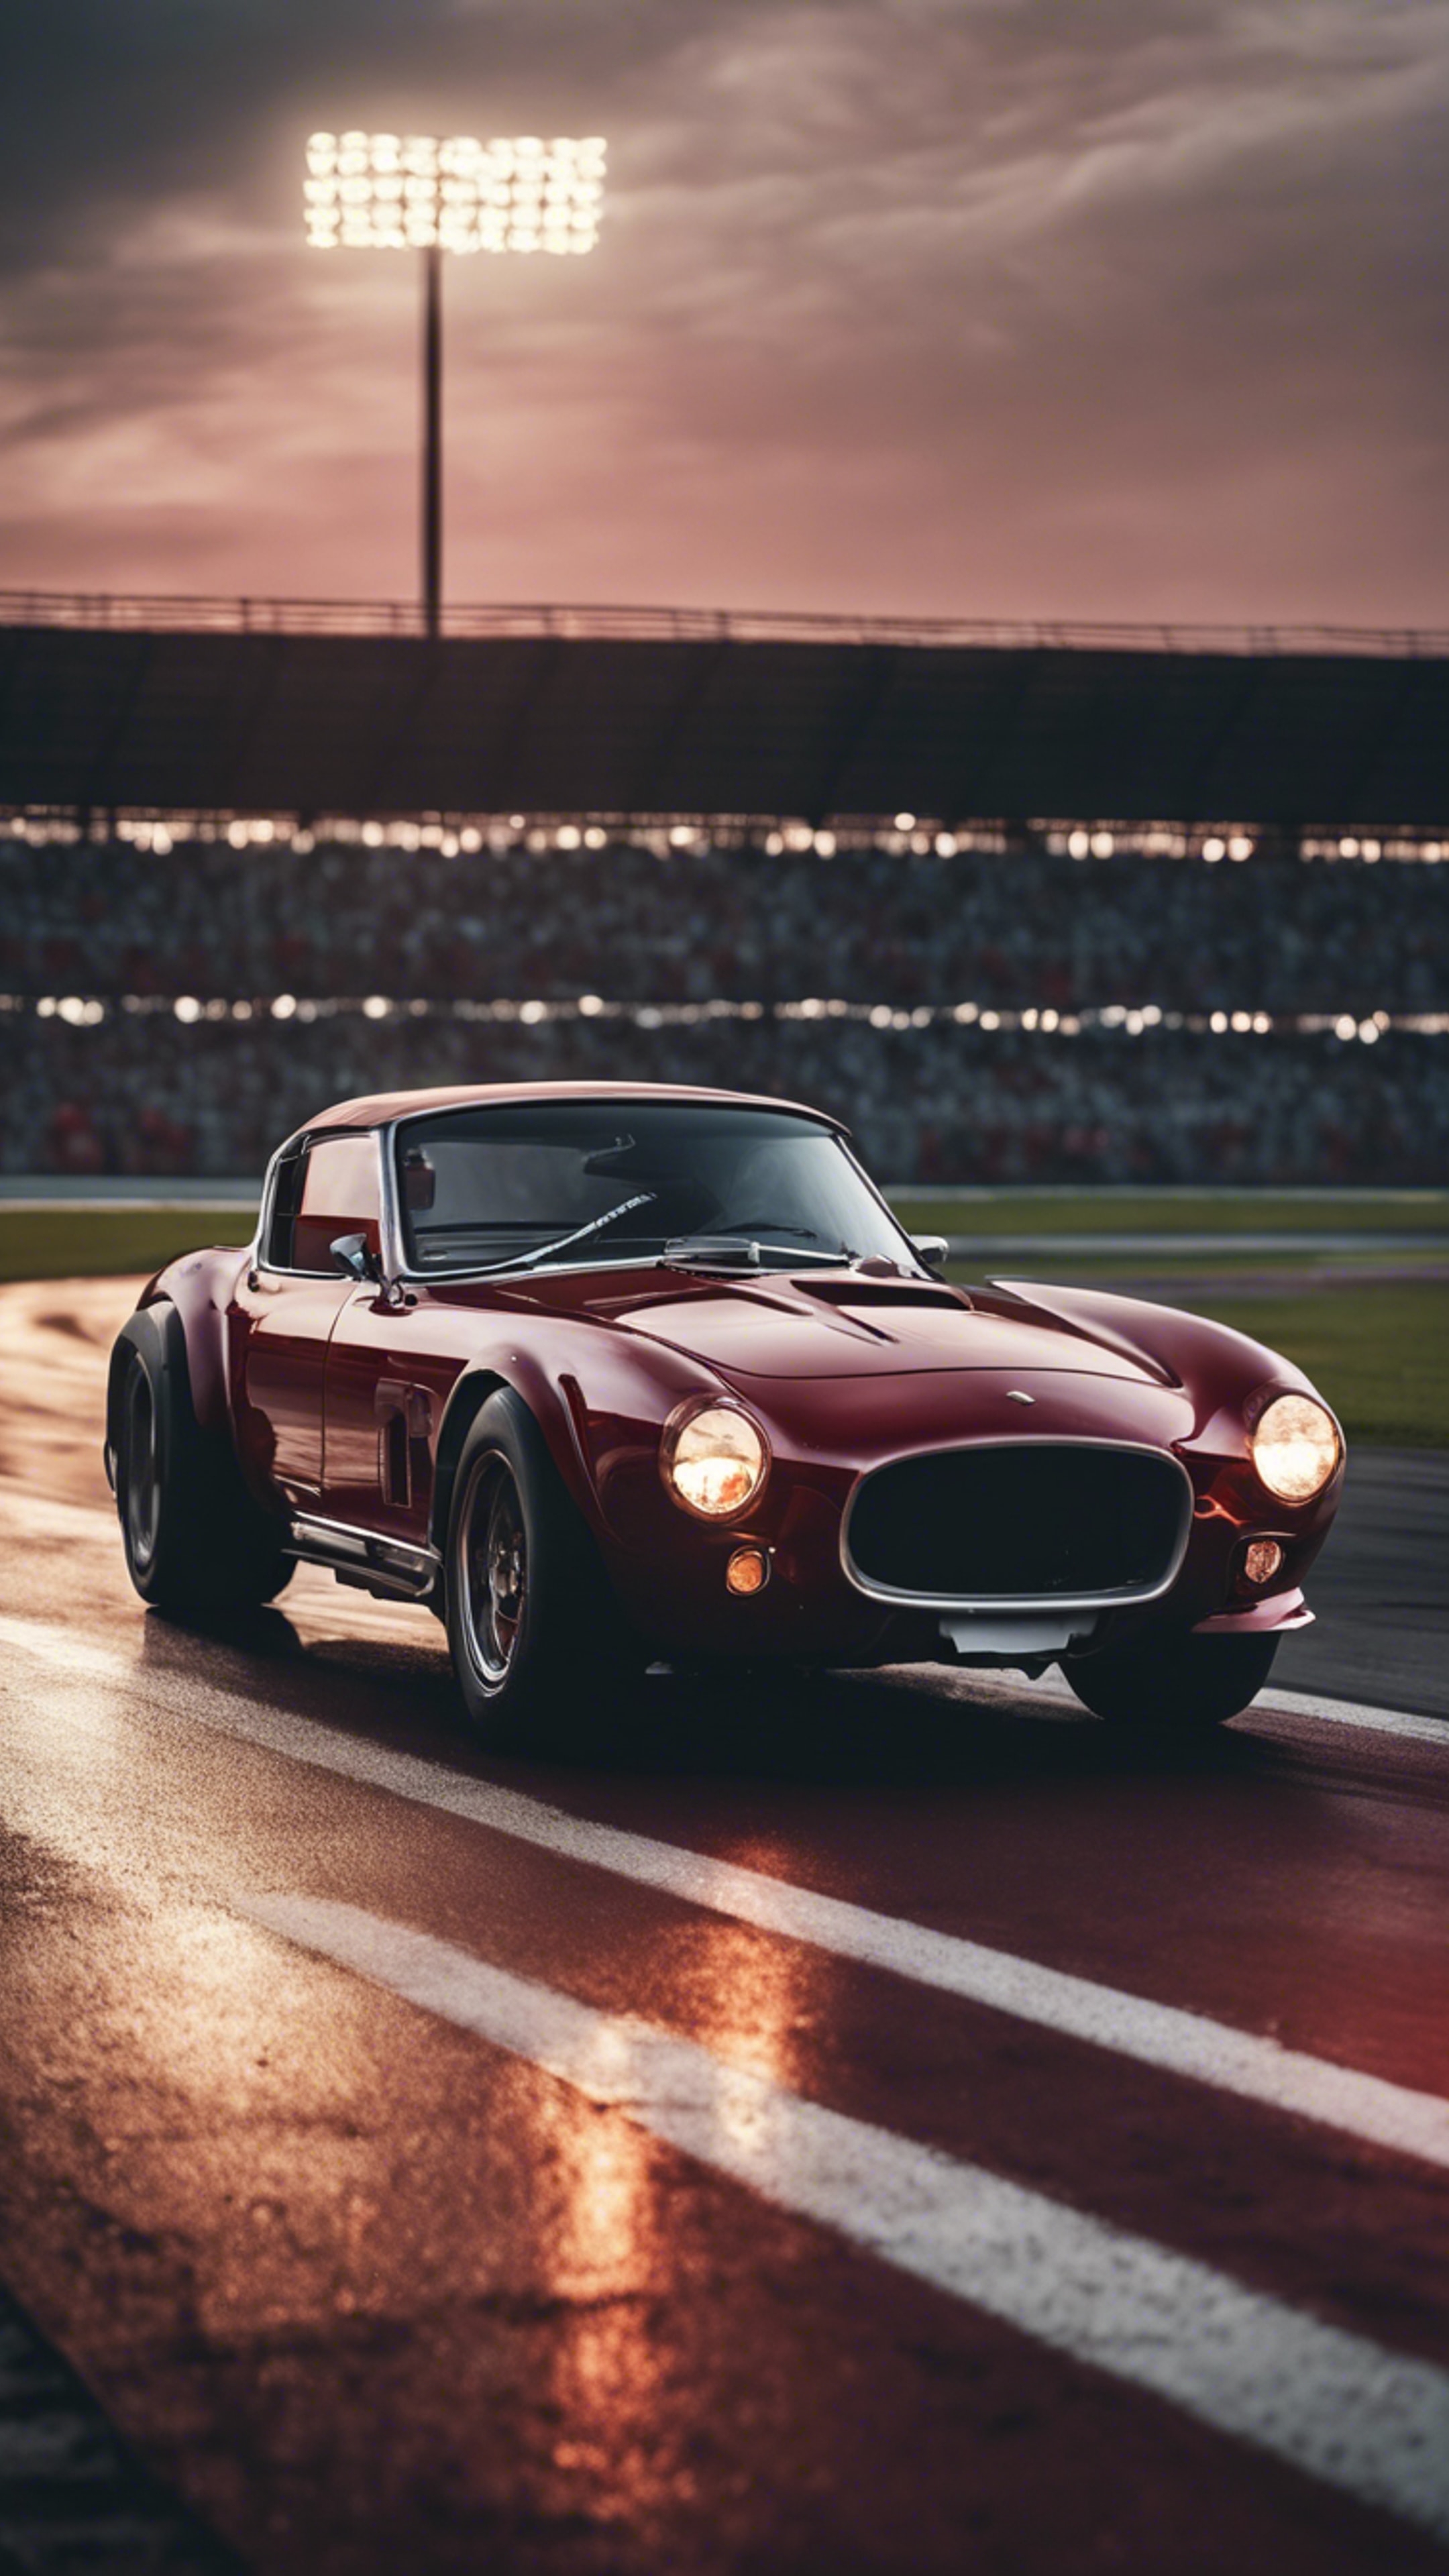 A richly toned dark red sports car racing on a track under the evening sky. Tapeta[f7c86e5103c94fca80ae]